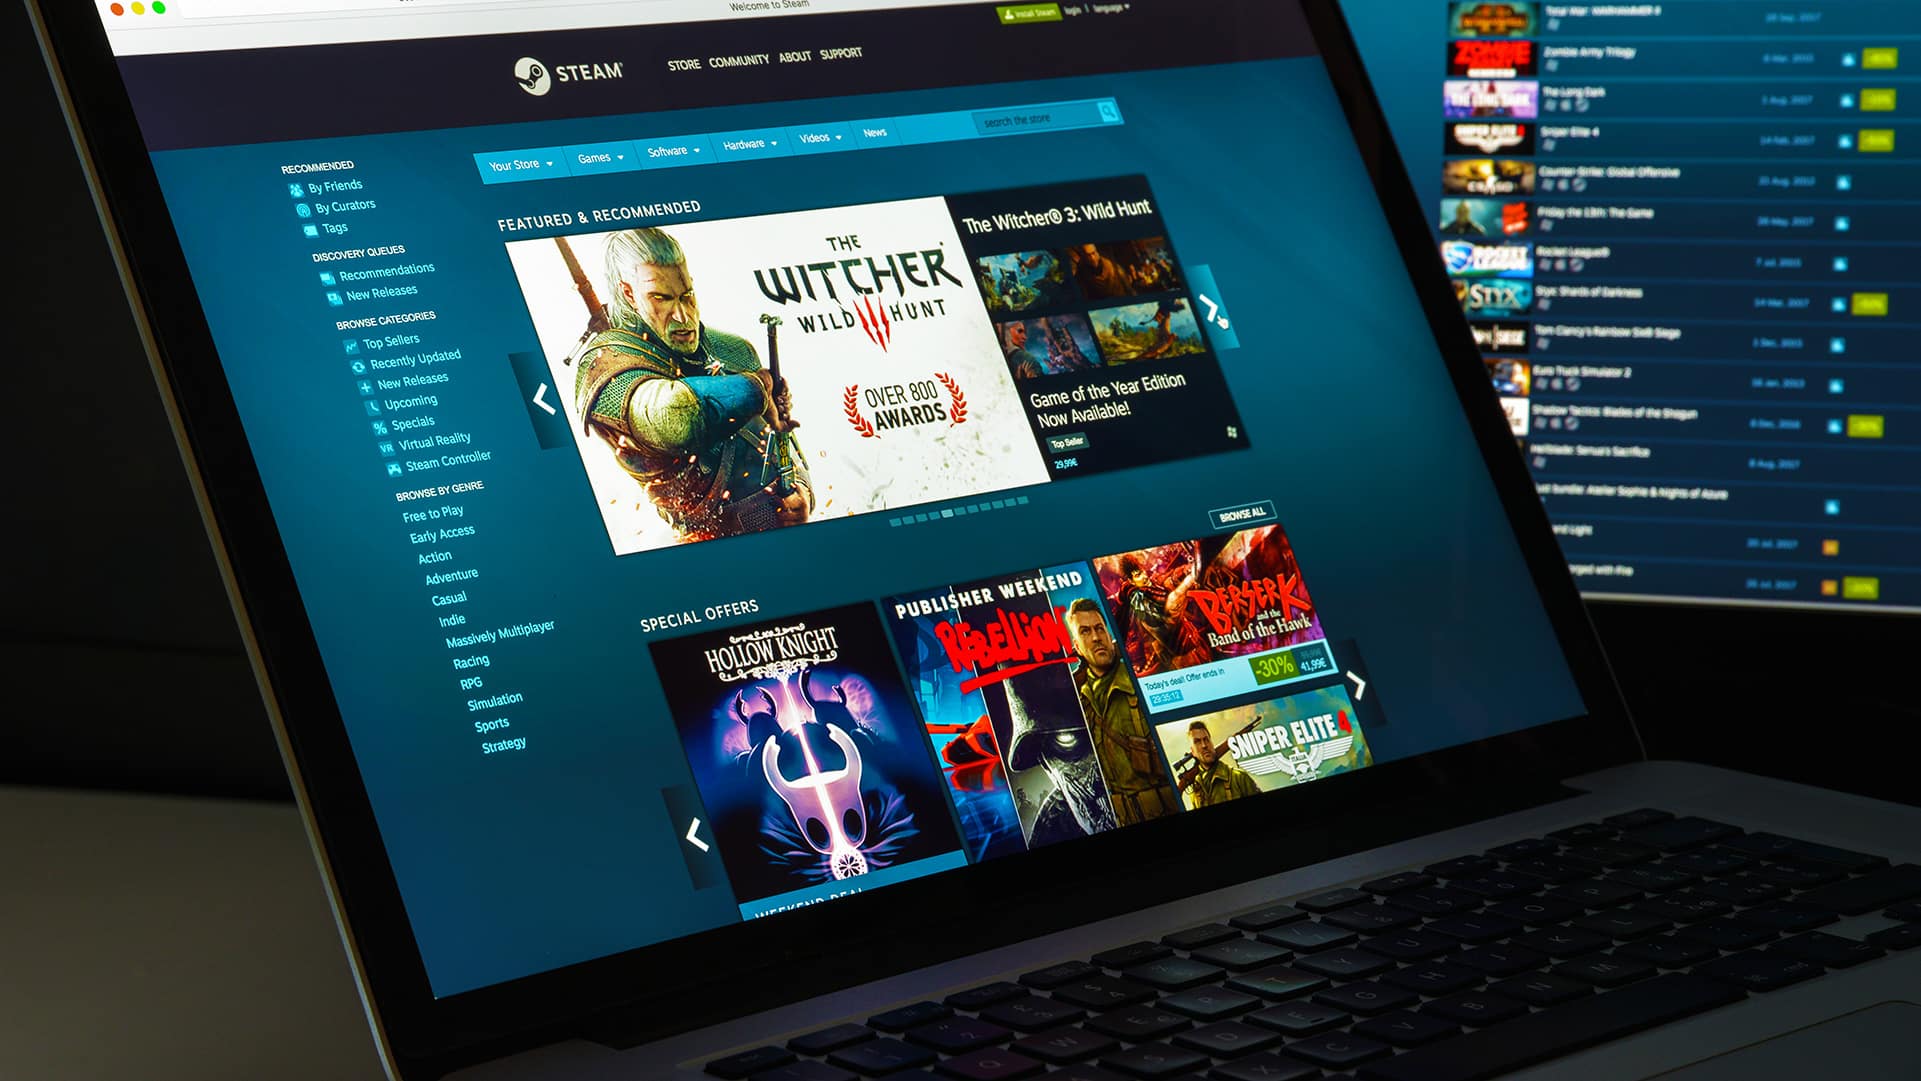 10 Of The Most Insanely Expensive Digital Items On Steam Marketplace